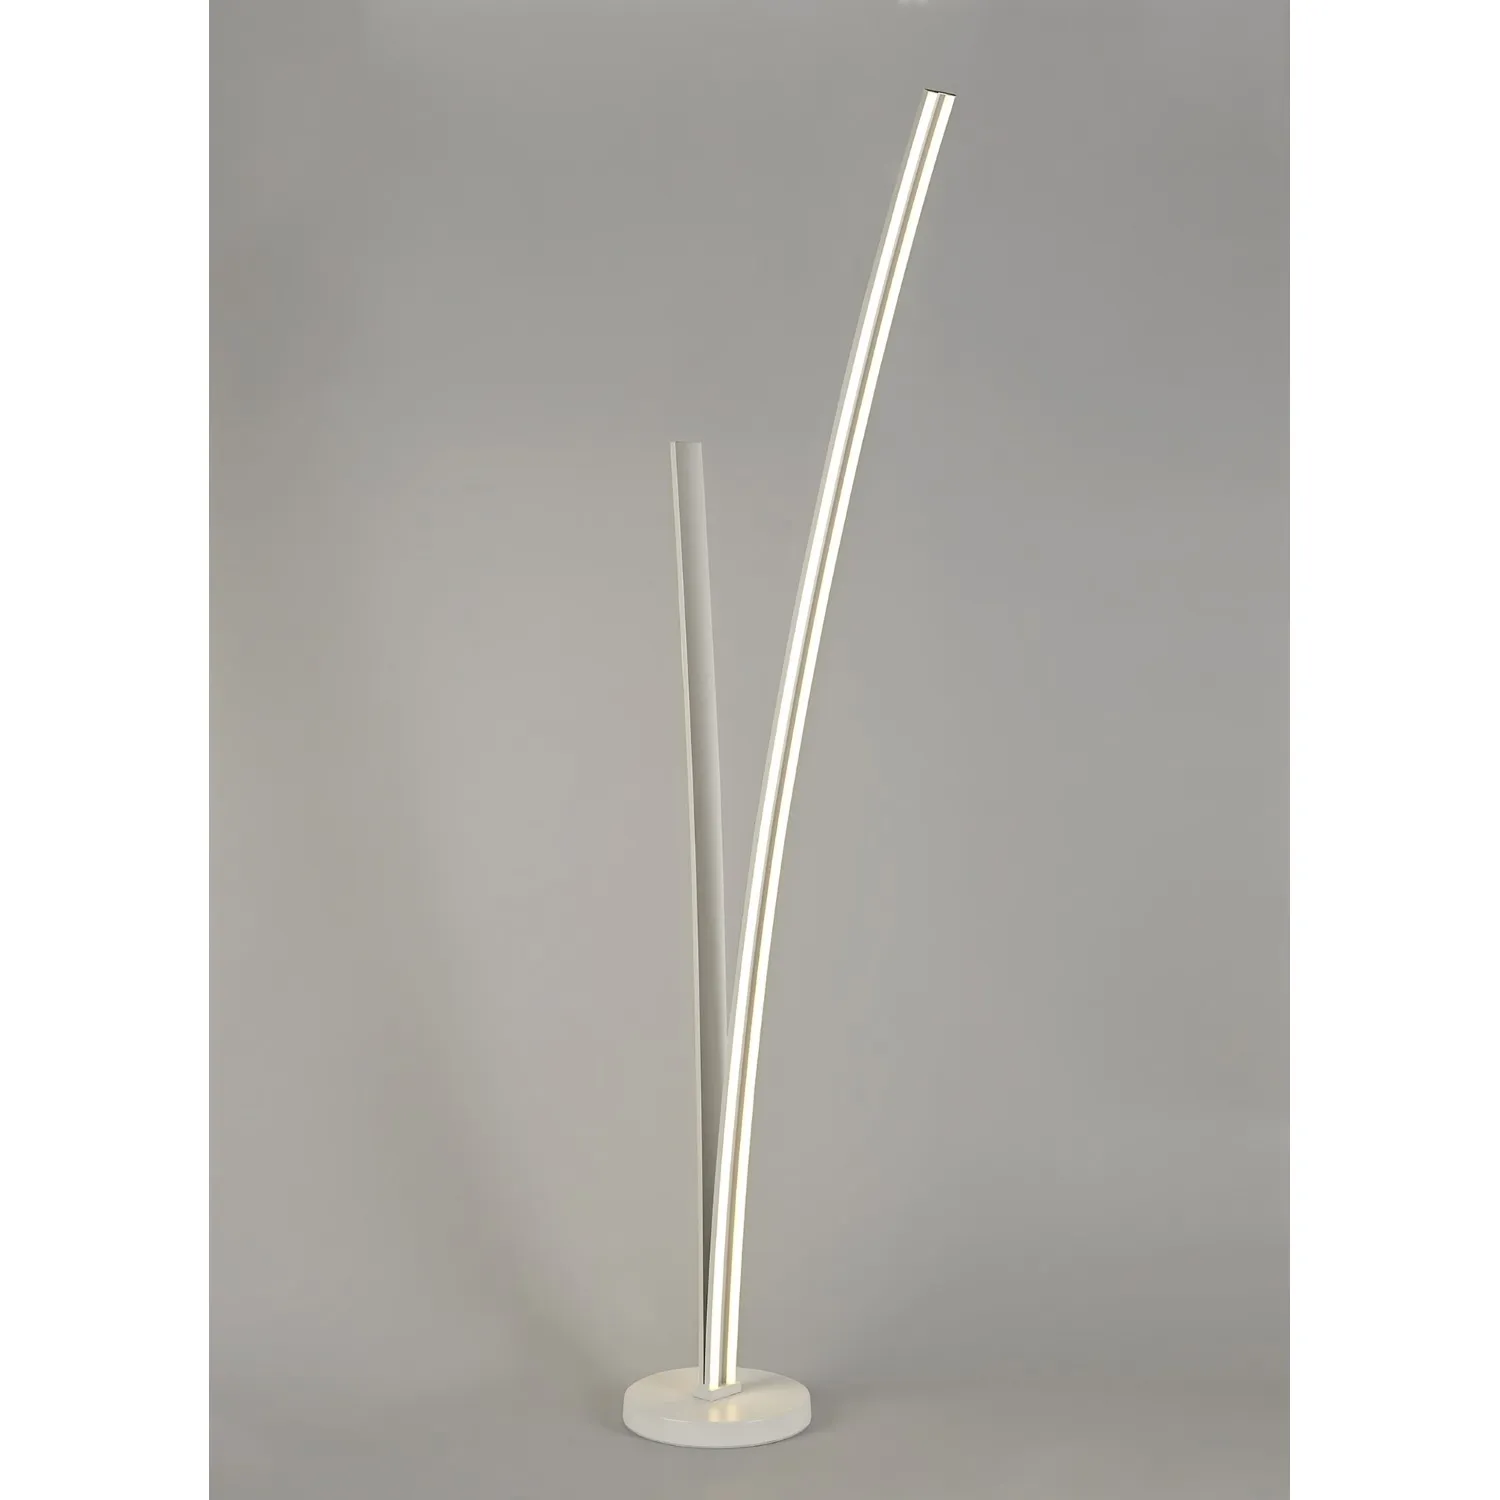 Portsmouth 2 Light Floor Lamp Dimmable, 16W 20W LED, 4000K, 2270lm, White, 3yrs Warranty